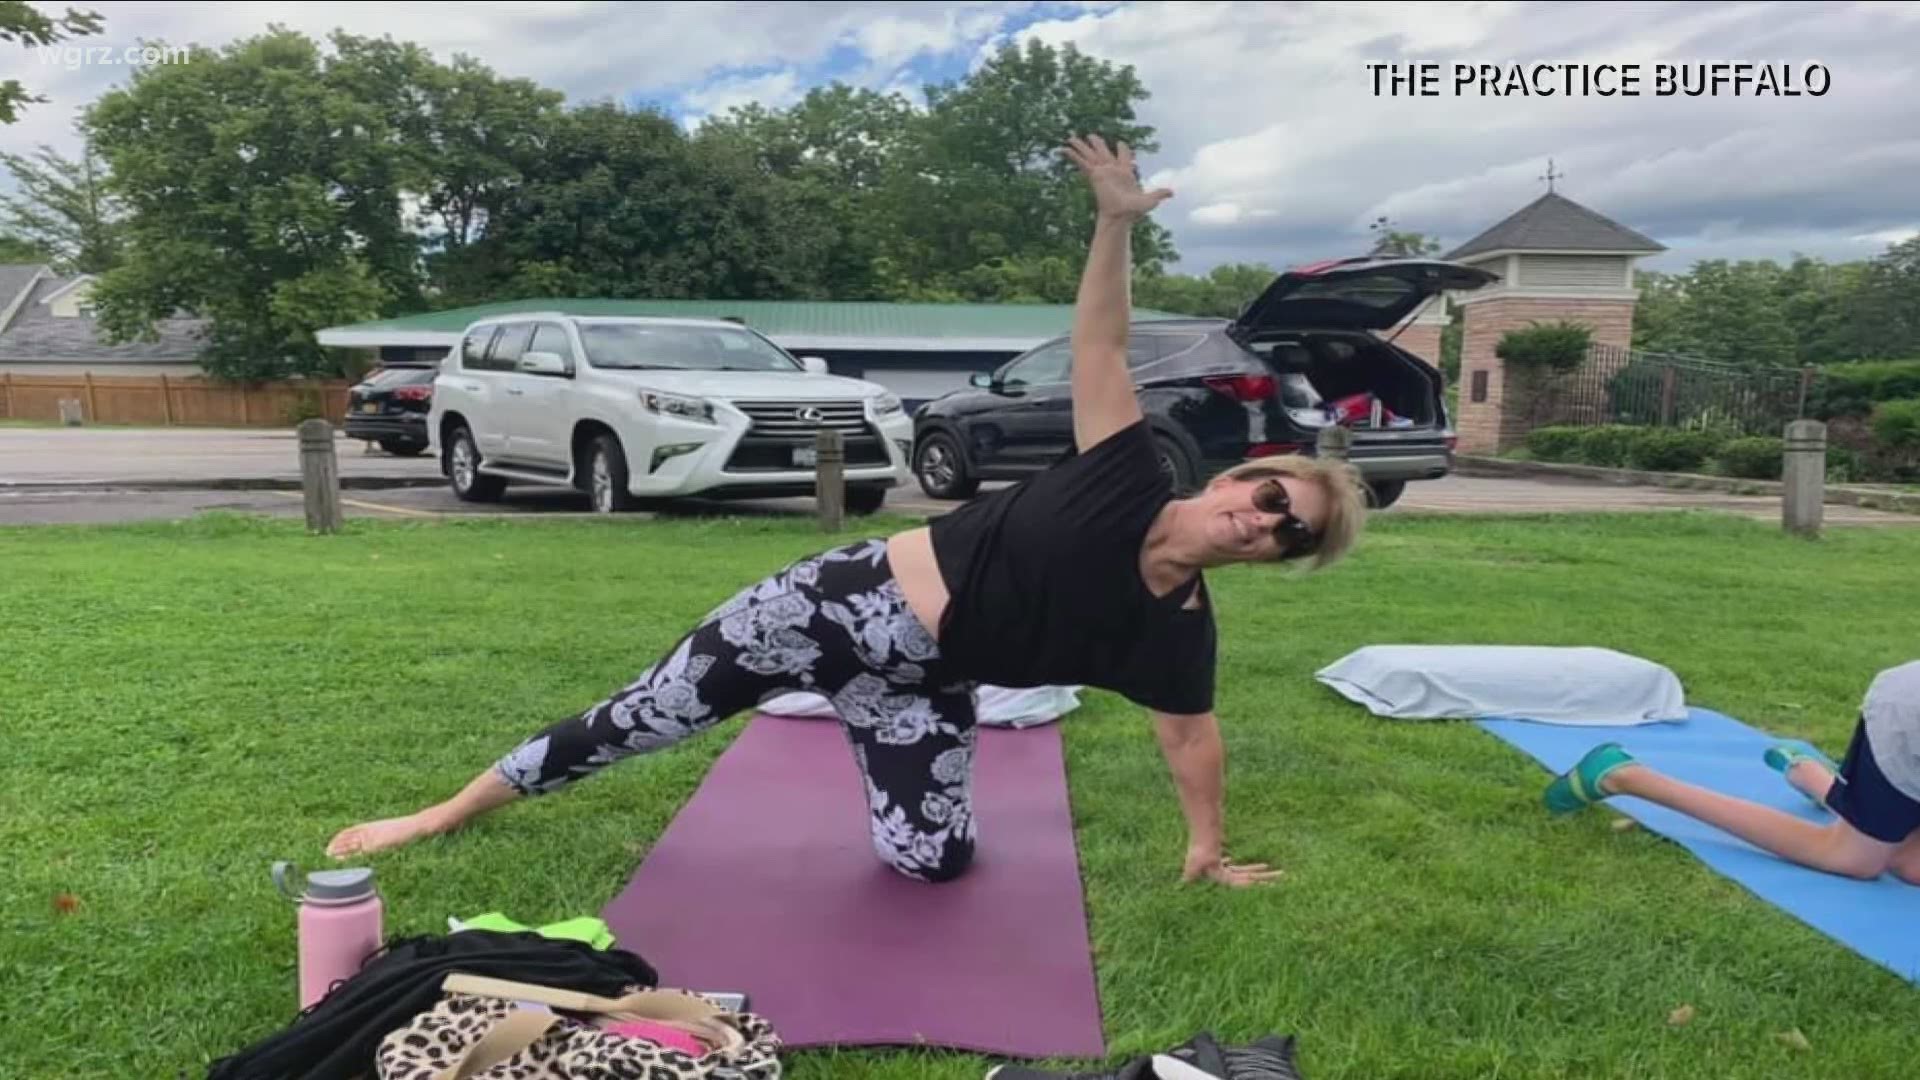 Yoga class for people of all abilities celebrates strength and community